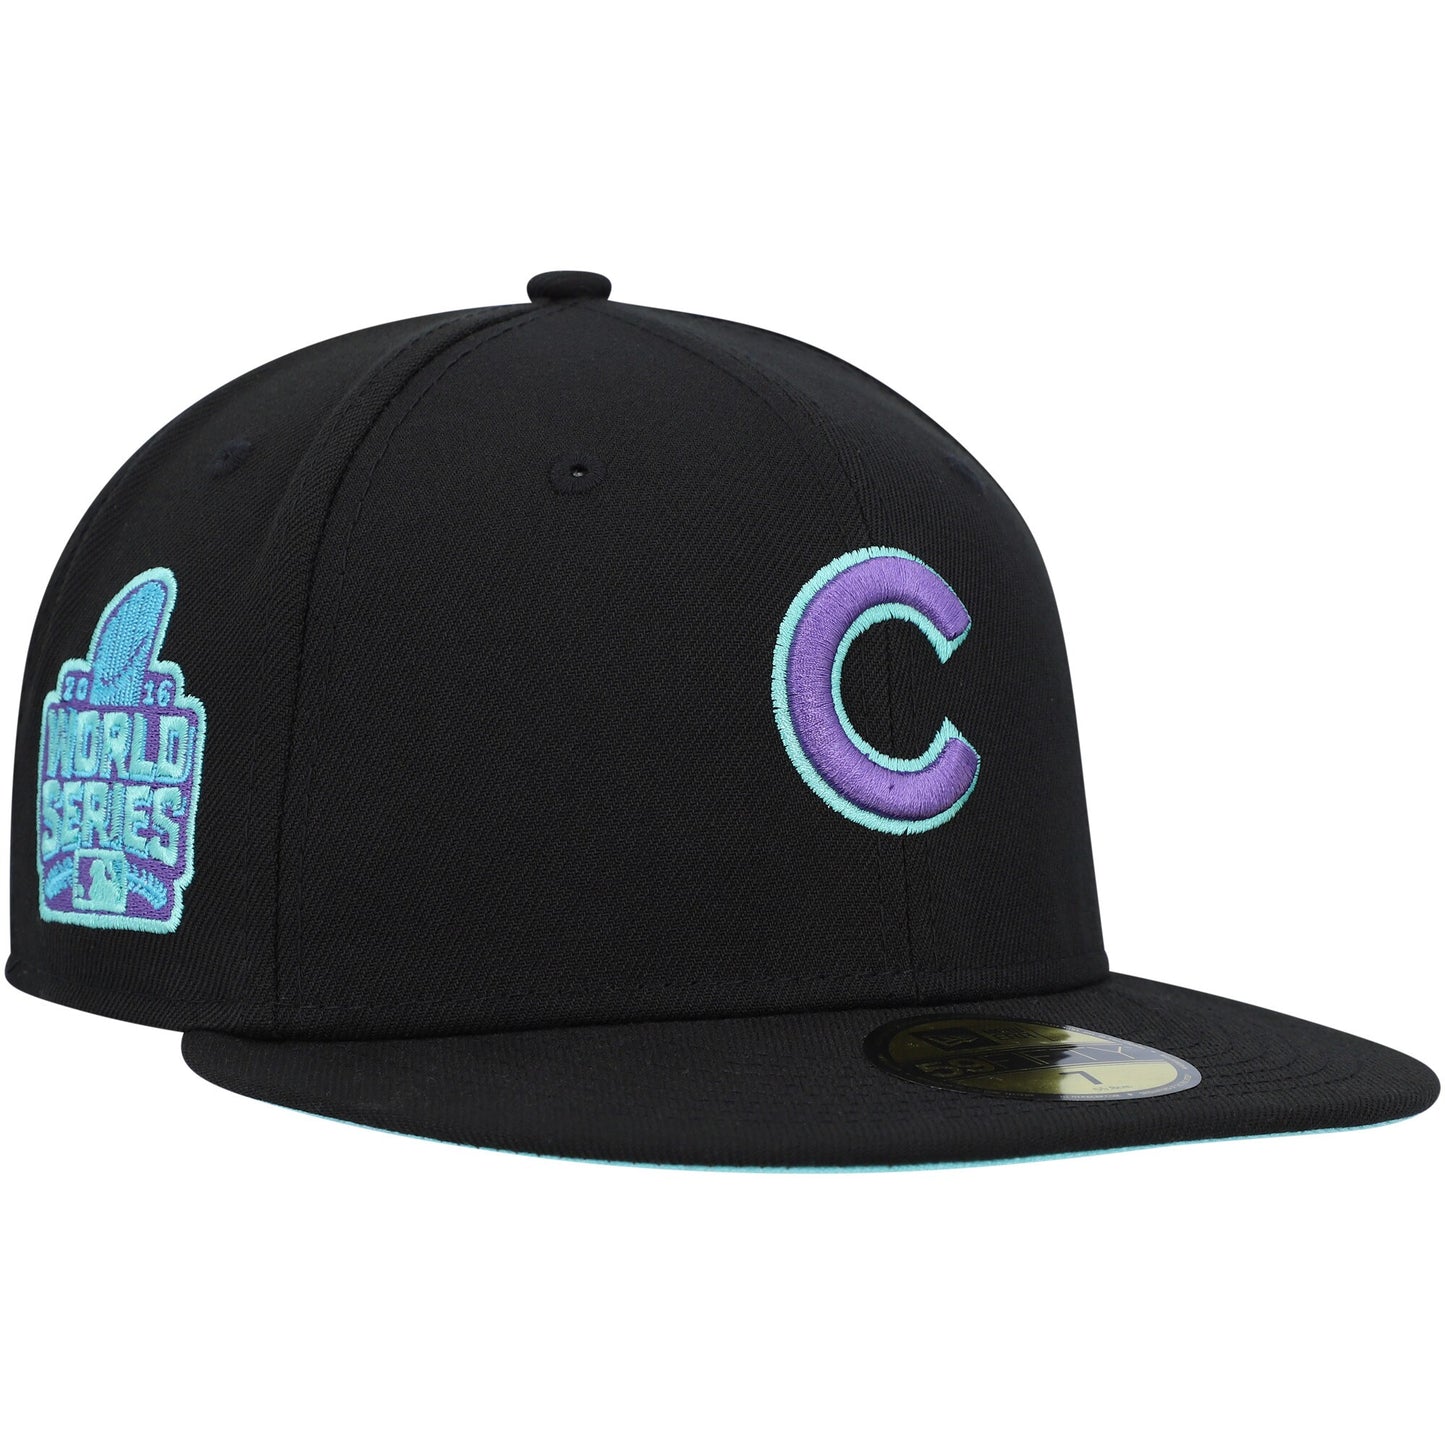 Chicago Cubs New Era 2016 World Series Black Light 59FIFTY Fitted Hat - Black